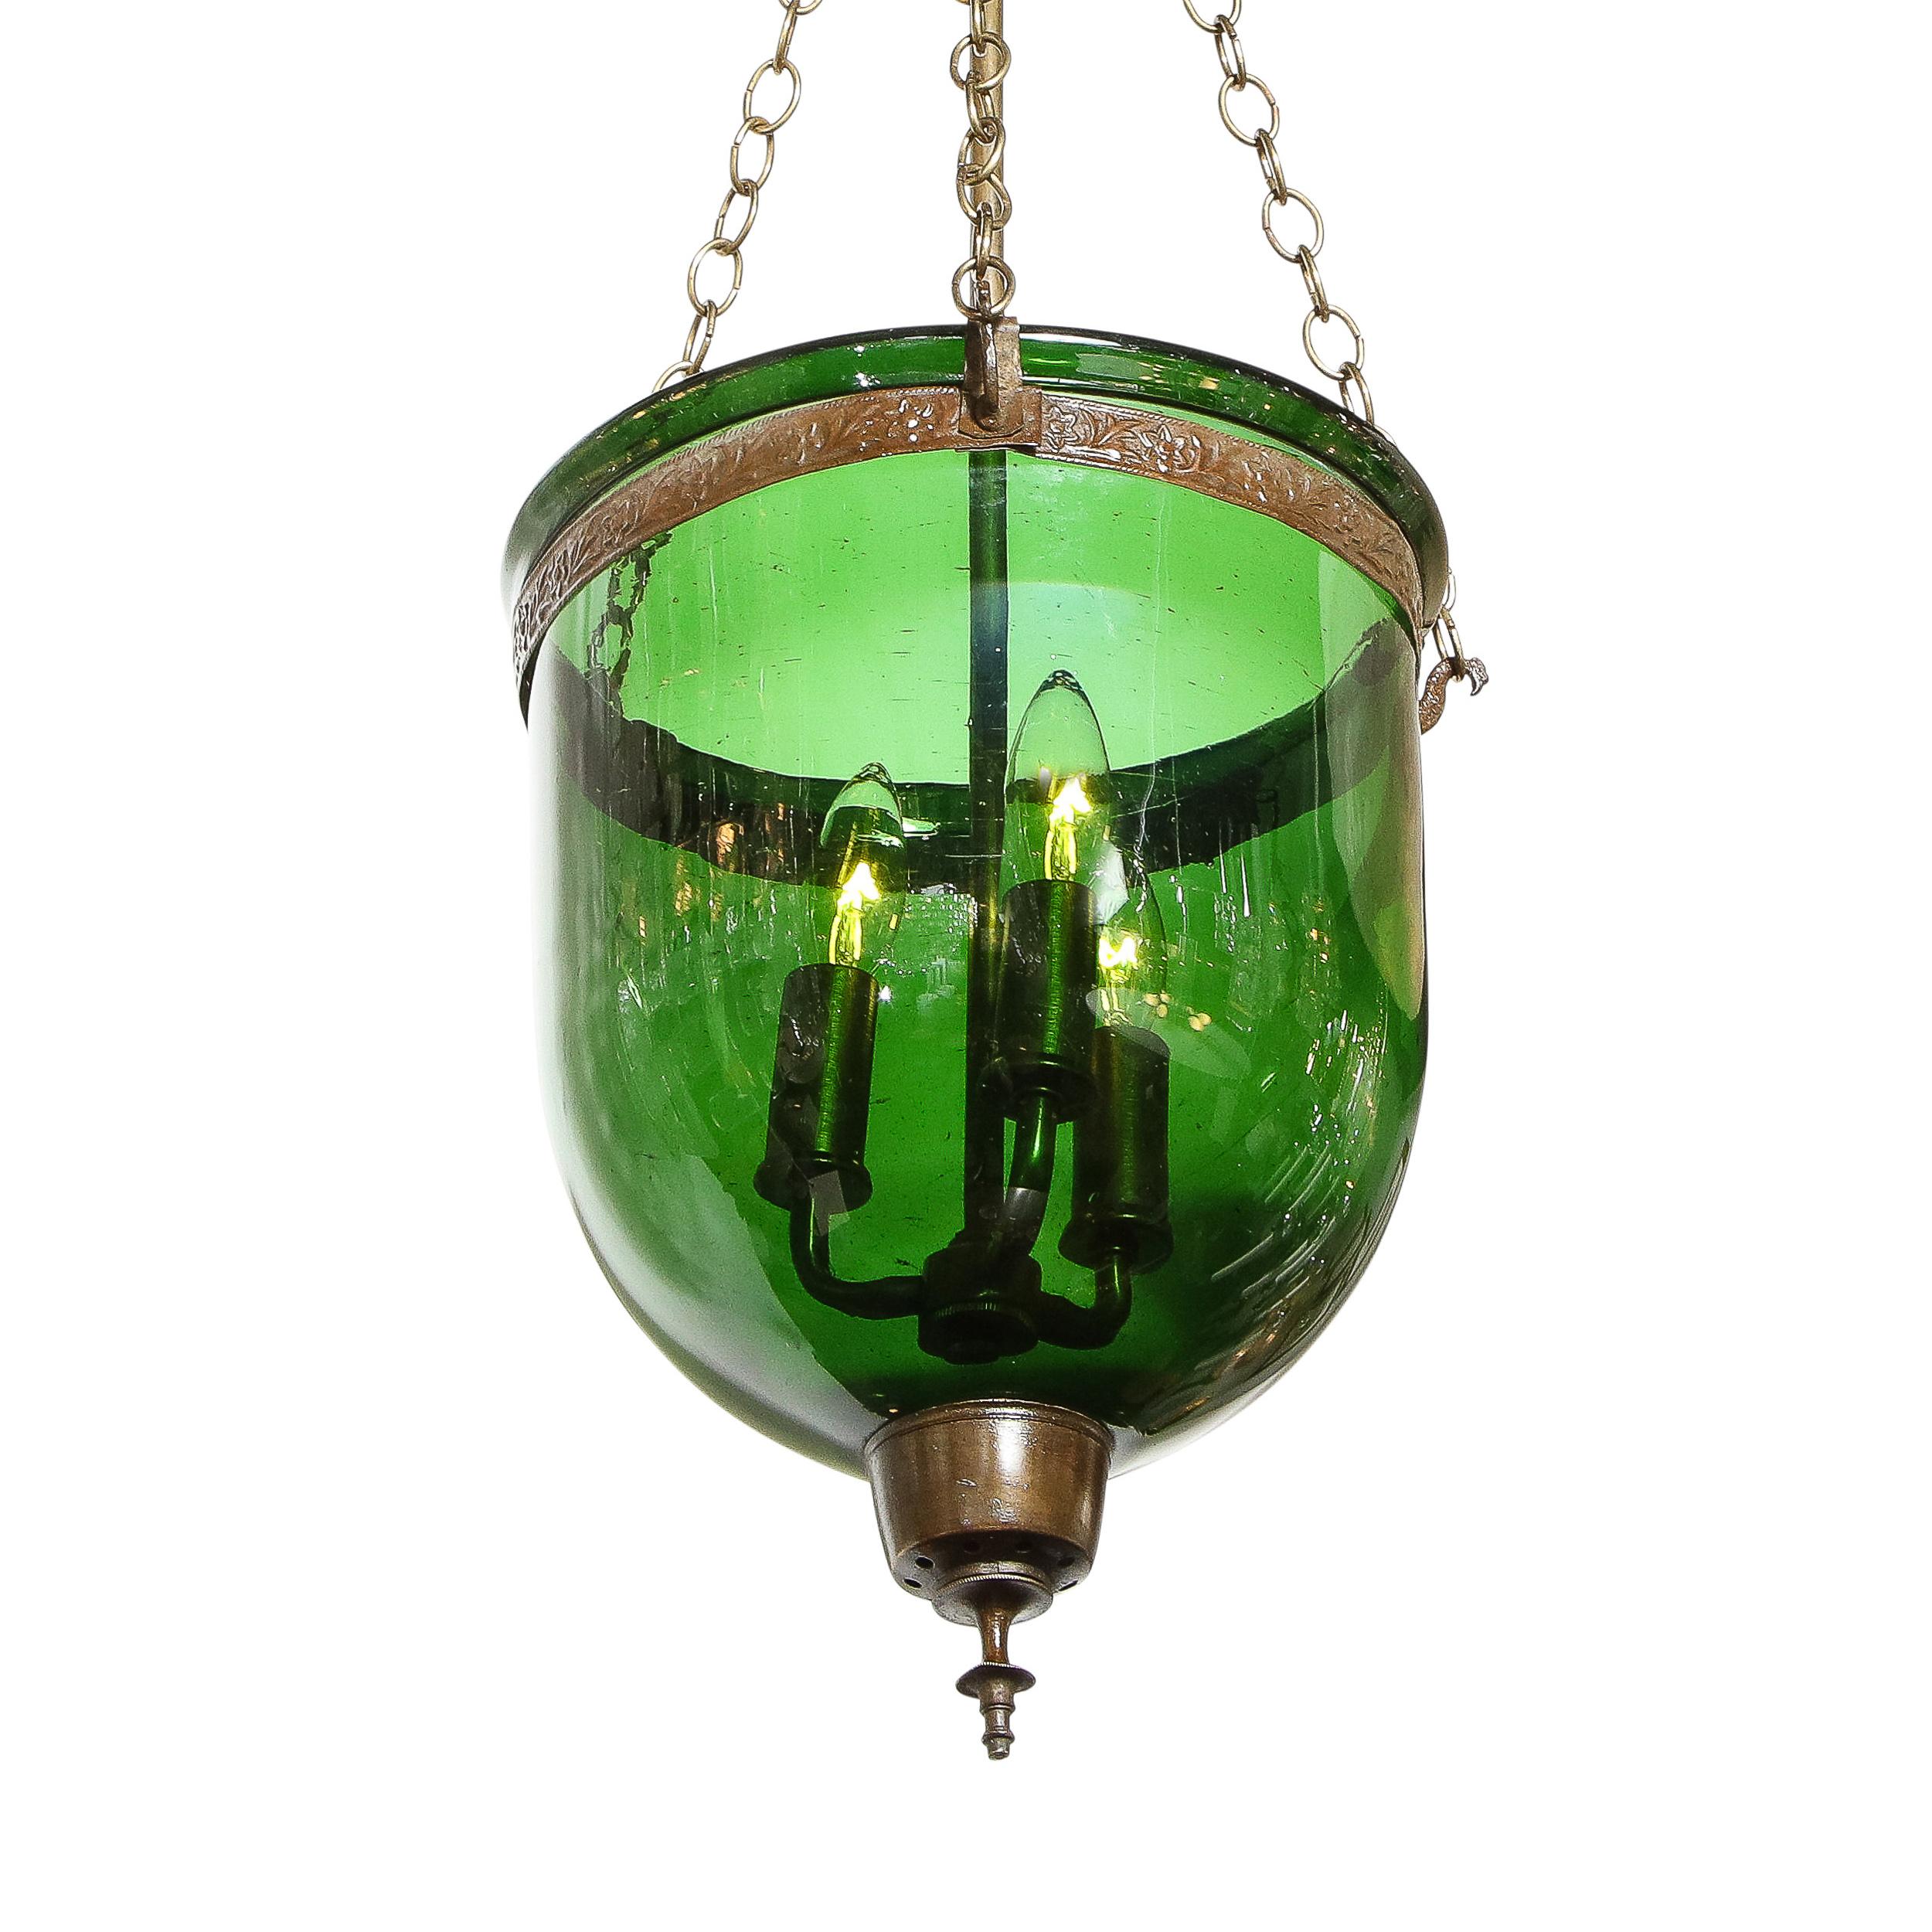 This stately classical pendant was realized in Russia during the 19th century. It features a domed translucent body blown in a rich emerald green glass; a sculptural undulating finial in bronze; the original chain and canopy (also in bronze); and a